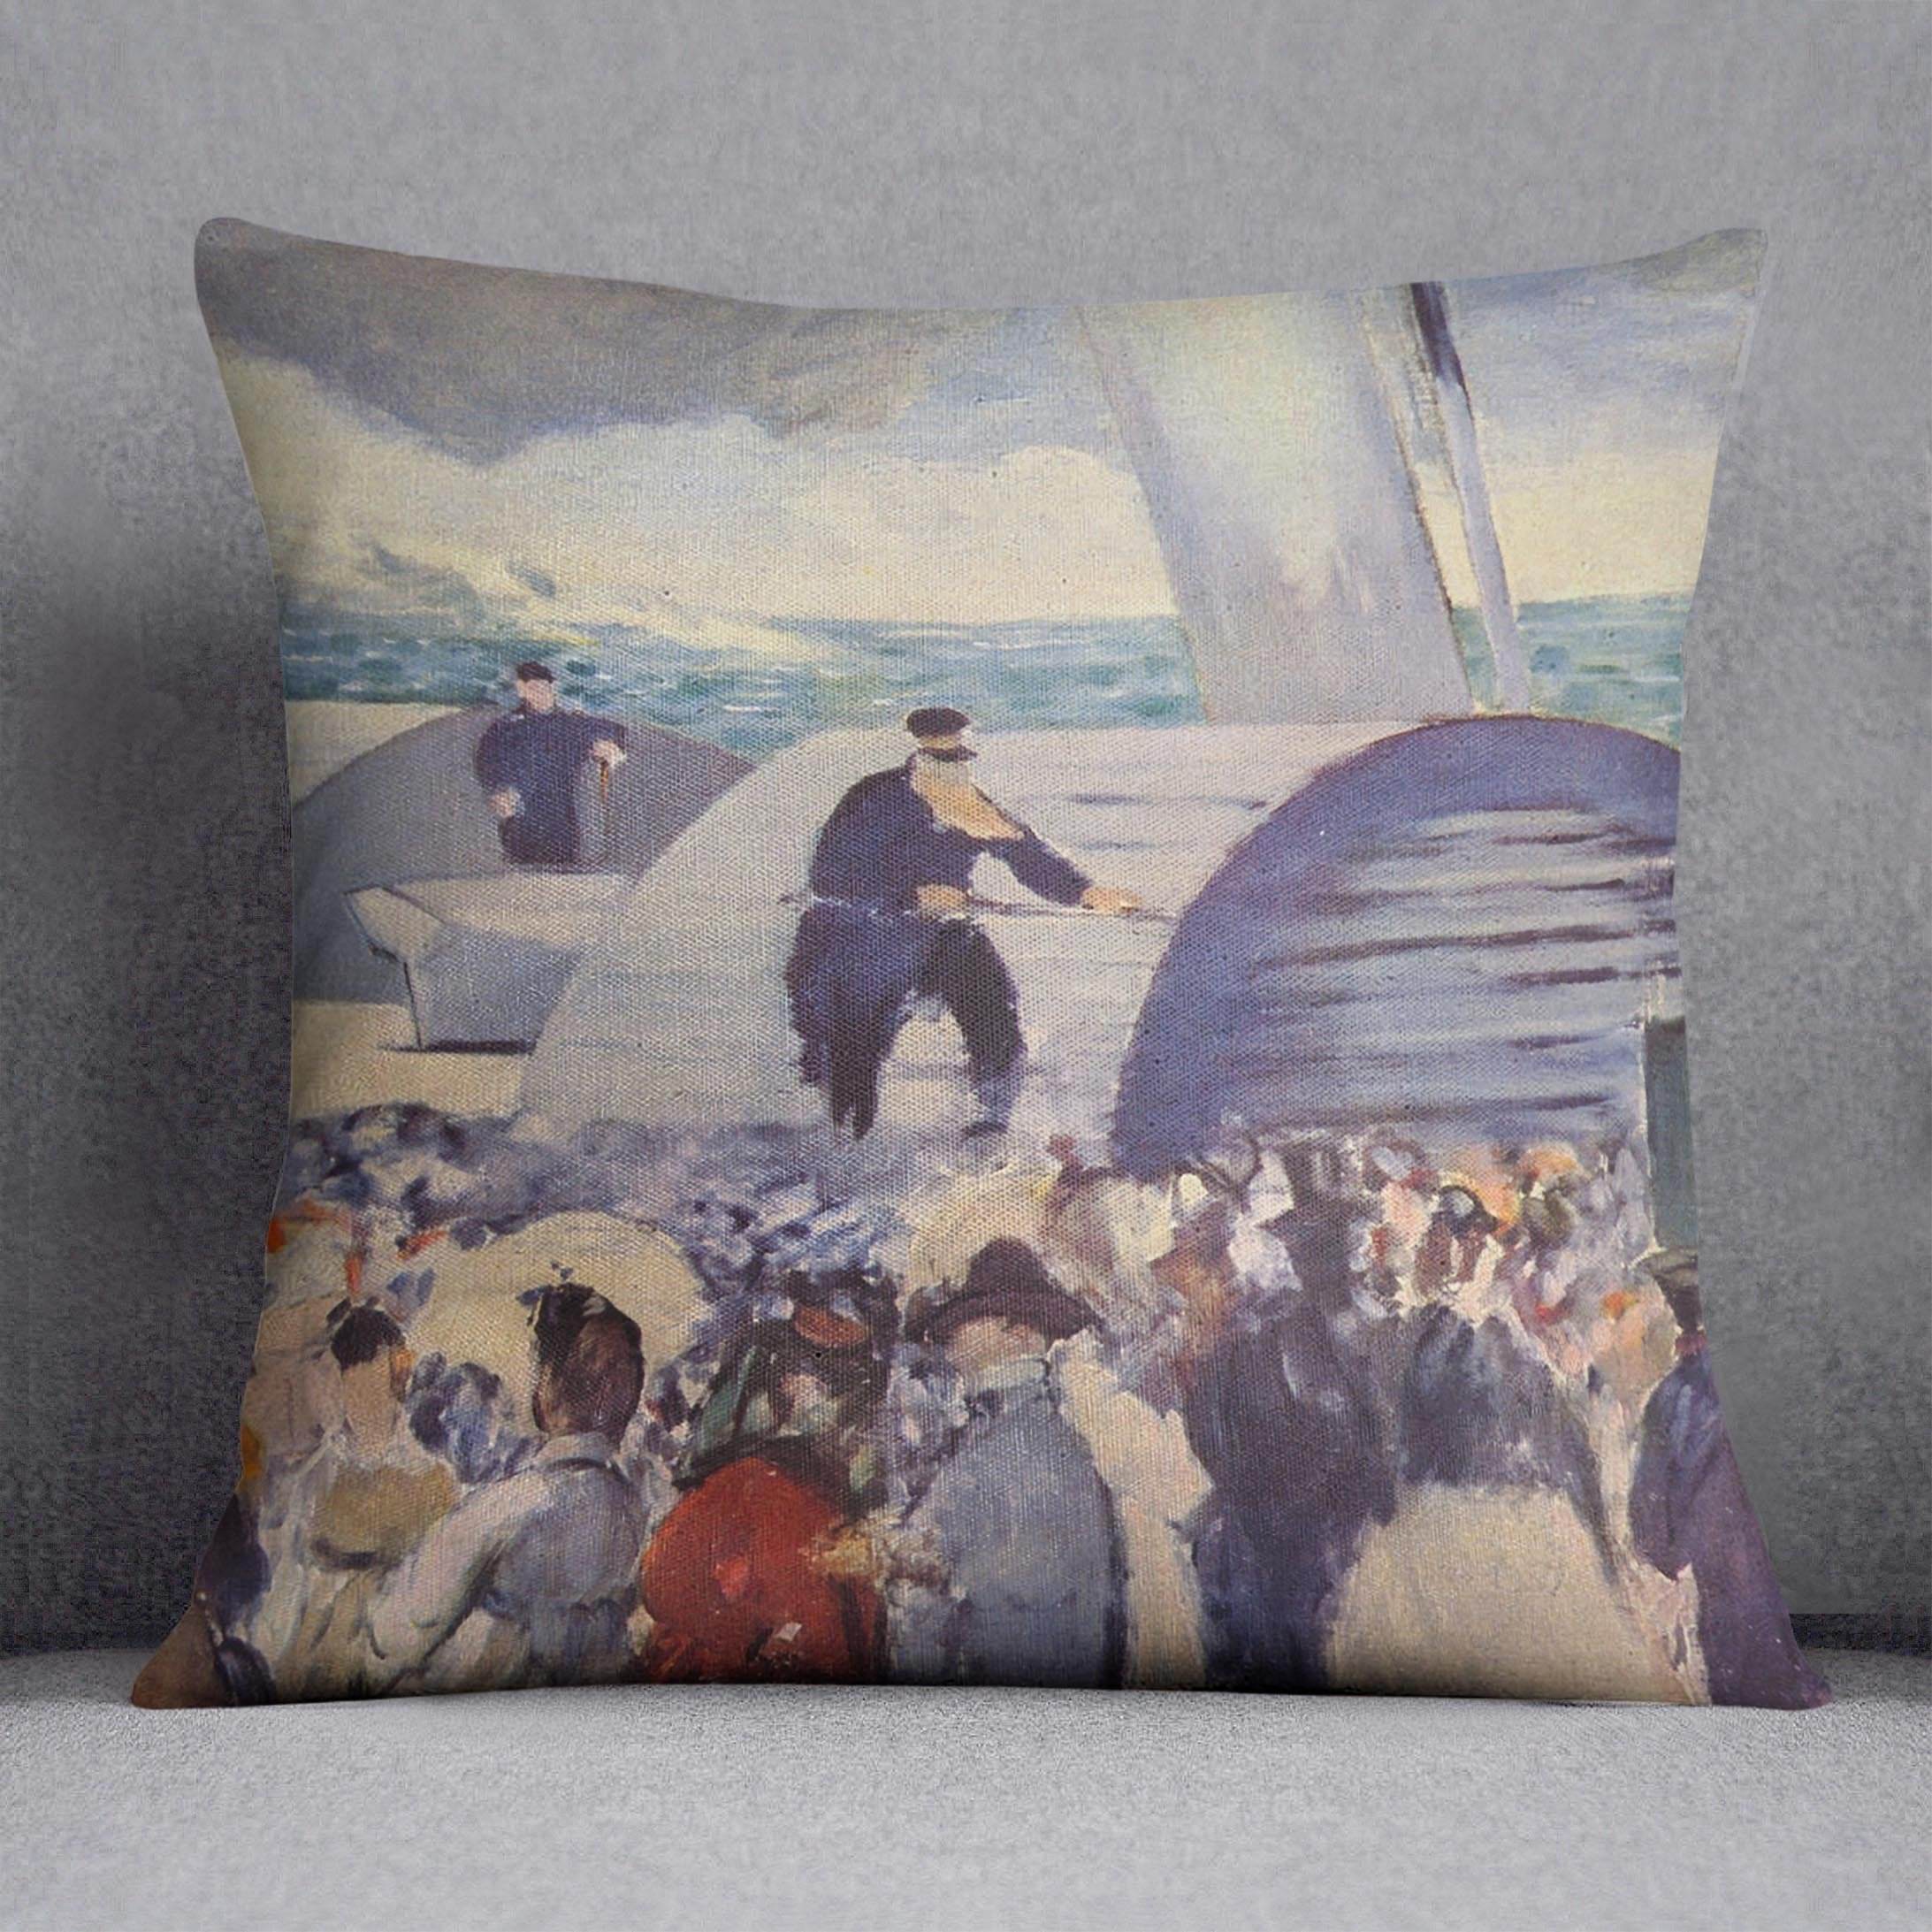 Embarkation of the Folkestone by Manet Throw Pillow